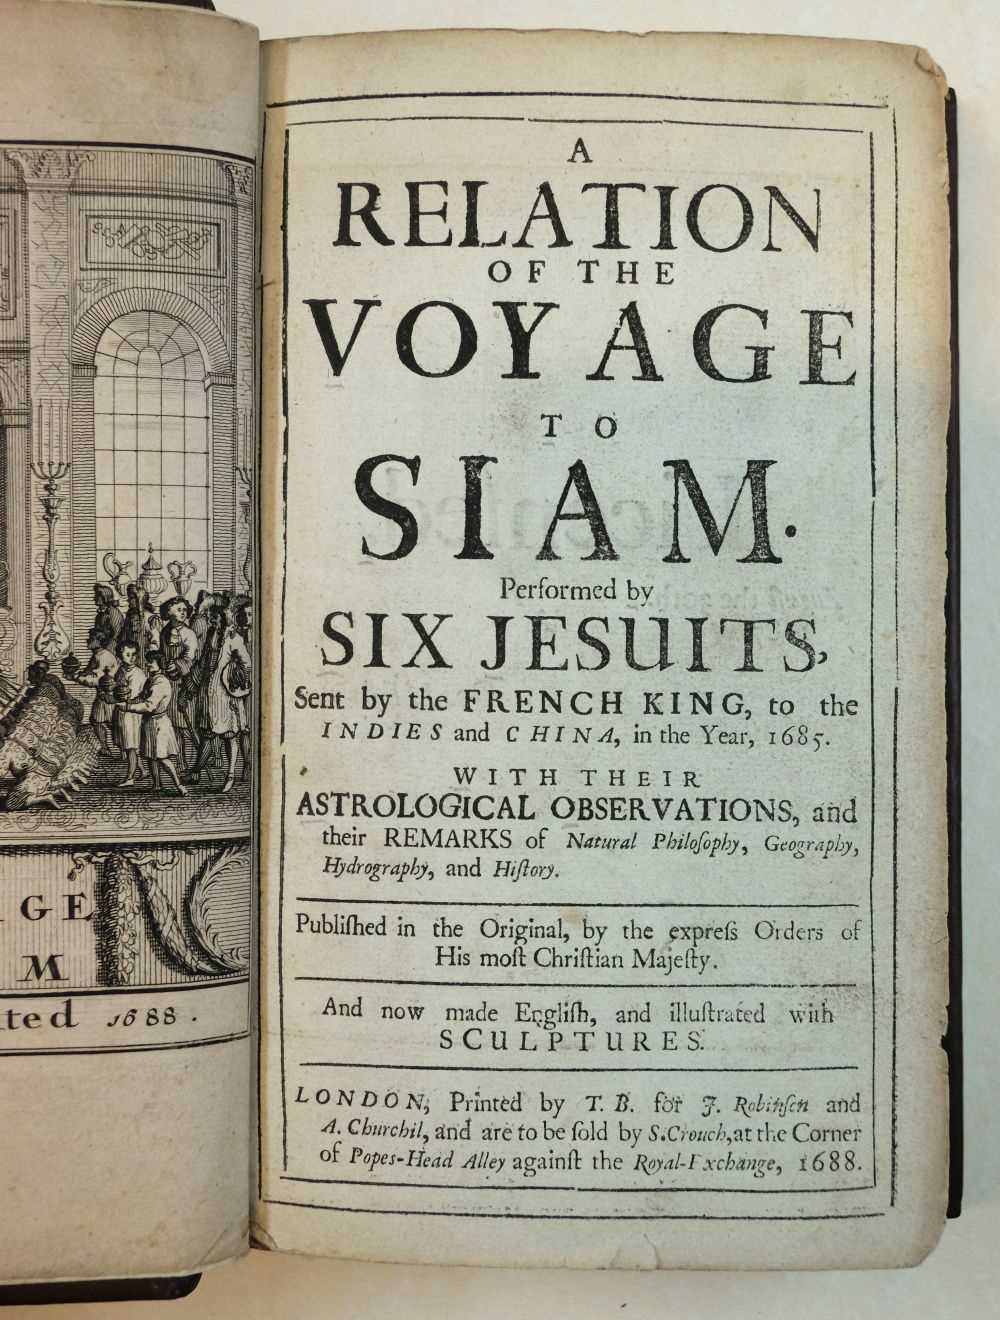 Tachard (Guy). A Relation of the Voyage to Siam, 1688